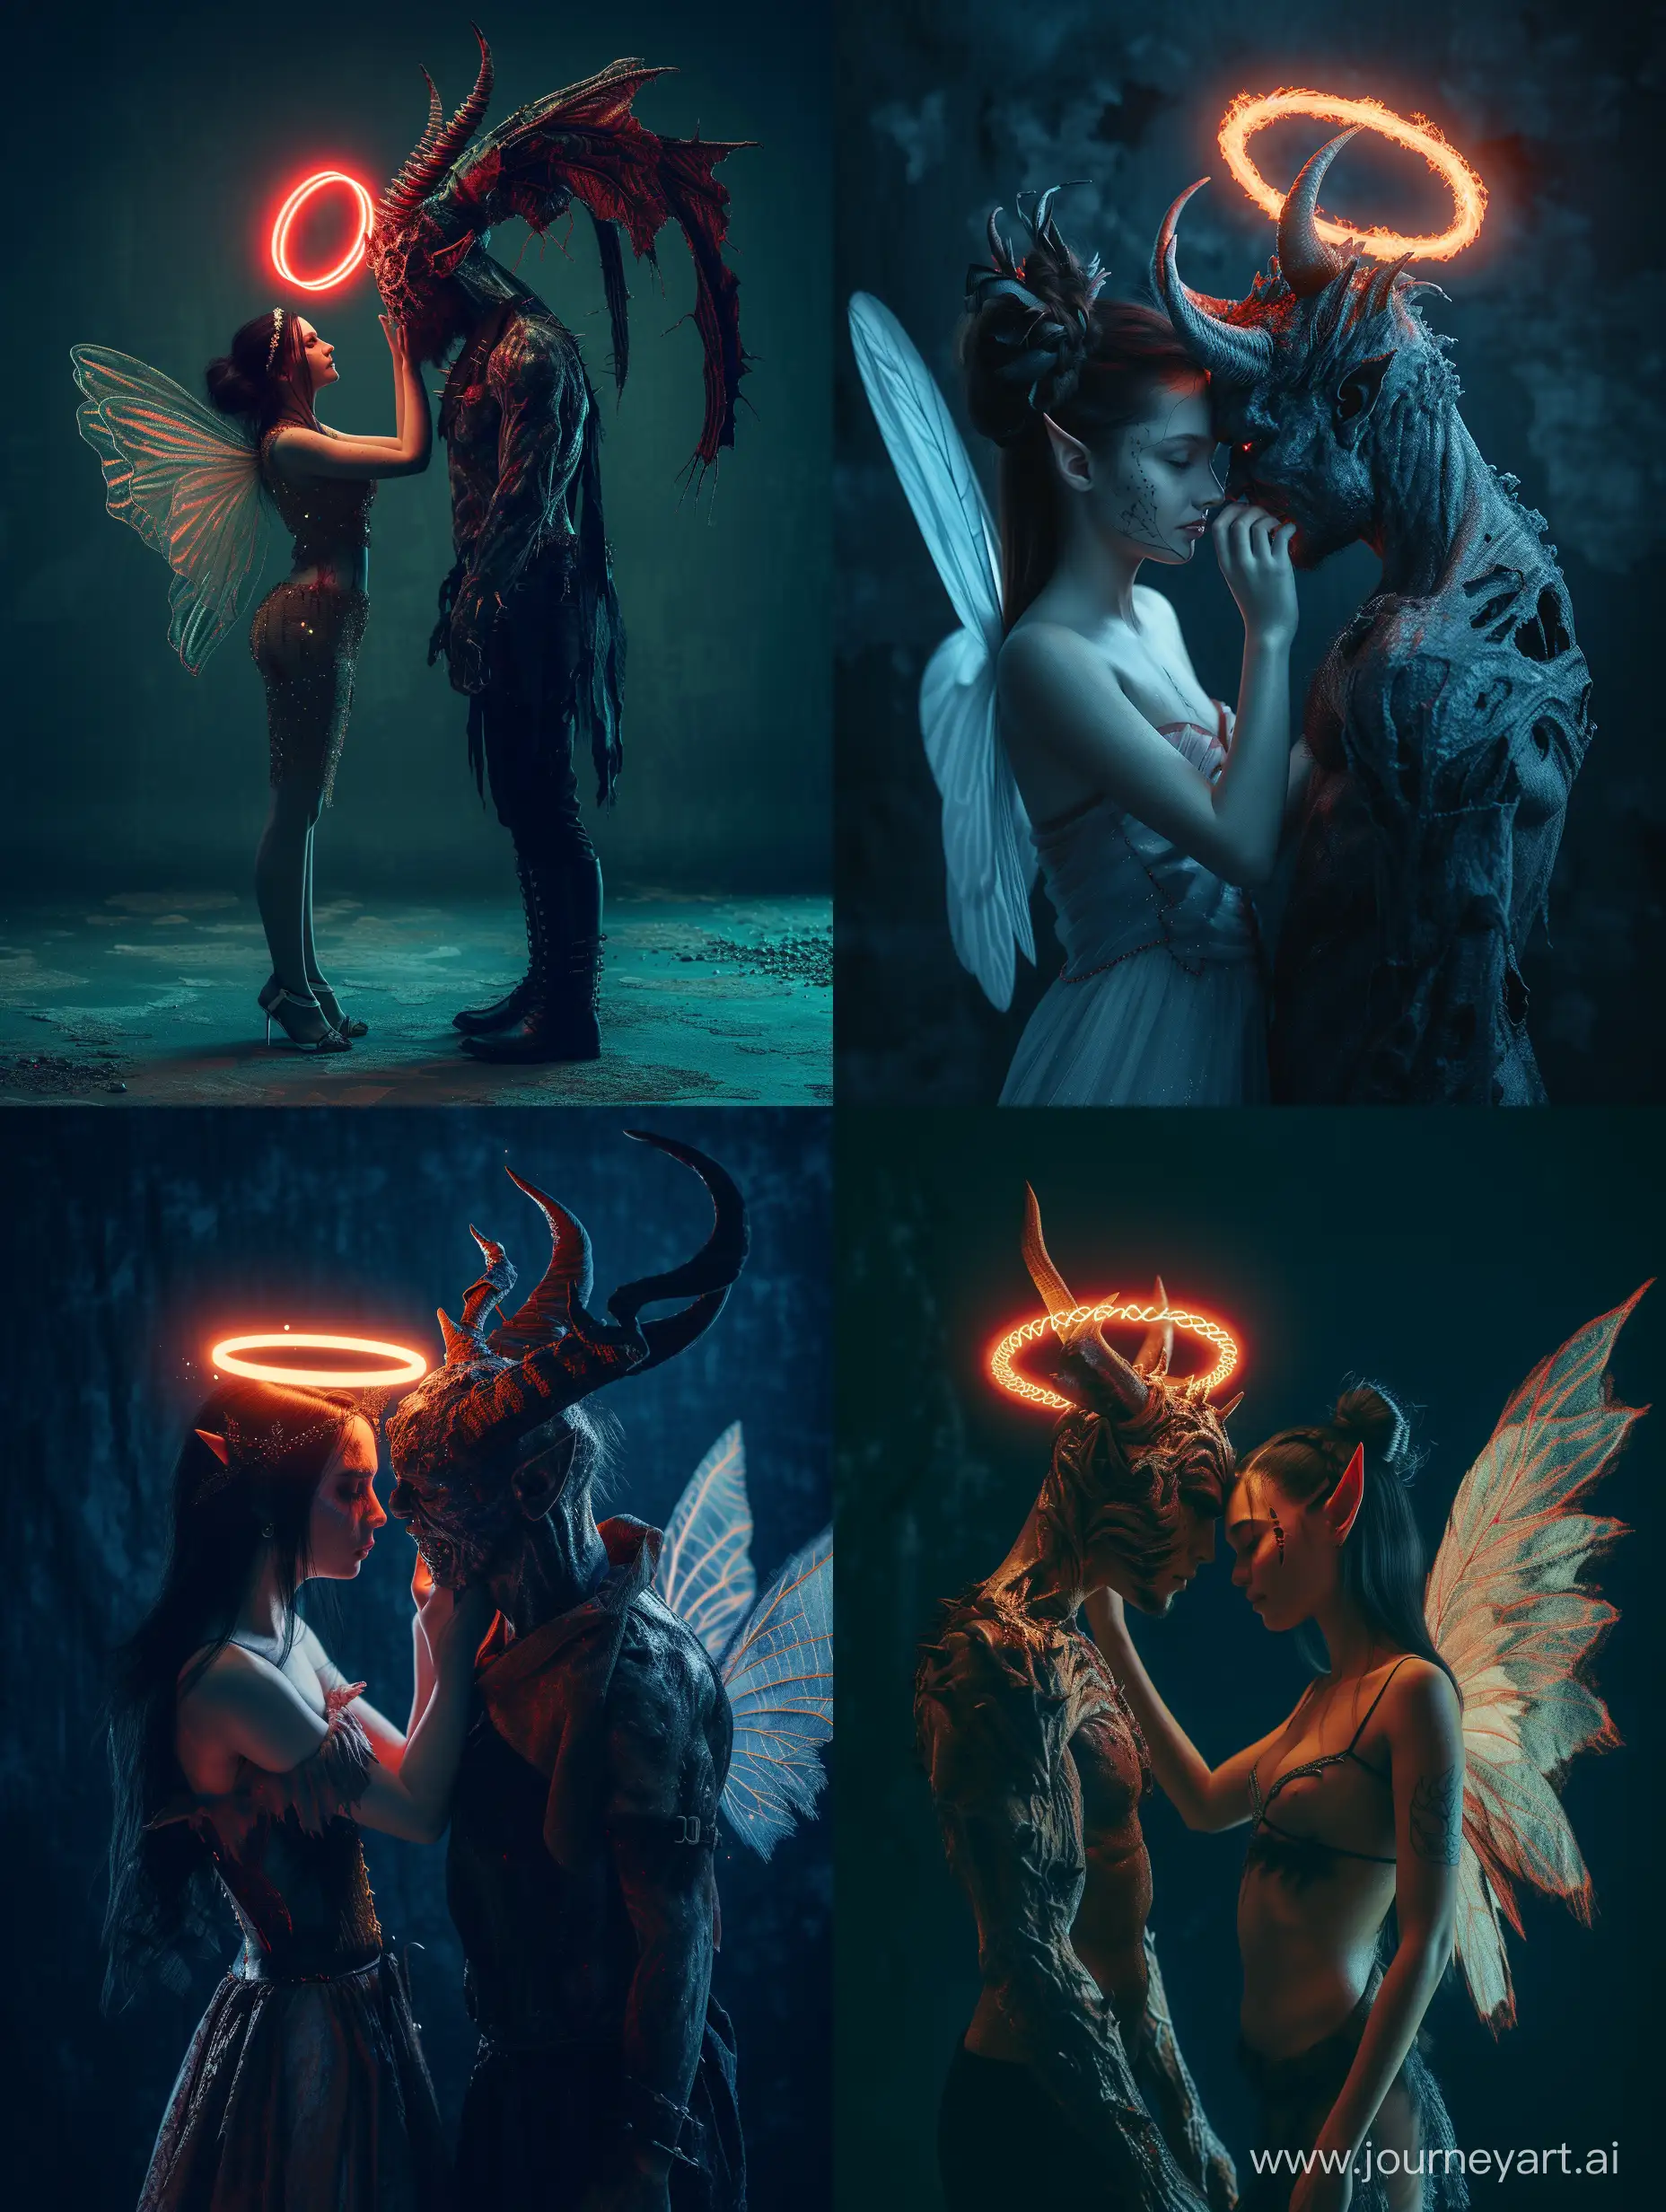 A demon with torn wings and a fairy stand against each other, the fairy lovingly and tenderly puts a glowing halo on the demon's head, dark environment, professional studio portrait photo, , octane render, hyper details, Cinematic, Color Grading, Editorial Photography, Photography, Photoshoot, Shot on 70mm, Ultra-Wide Angle, Depth of Field, DOF, Tilt Blur, Shutter Speed 1/1000, F/22, Gamma, White Balance, Neon, Light, Dark, Light Mode, Dark Mode, High Contrast, Super-Resolution, Megapixel, ProPhoto RGB, VR, Lonely, Good, Massive, Big, Spotlight, Frontlight, Halfrear Lighting, Backlight, Rim Lights, Rim Lighting, Artificial Lighting, Natural Lighting, Incandescent, Optical Fiber, Moody Lighting, Cinematic Lighting, Studio Lighting, Soft Lighting, Hard Lighting, volumetric Light, Volumetric Lighting, Volumetric,, cinematic color grade, chromatic aberrations, artful bokeh depth of field.